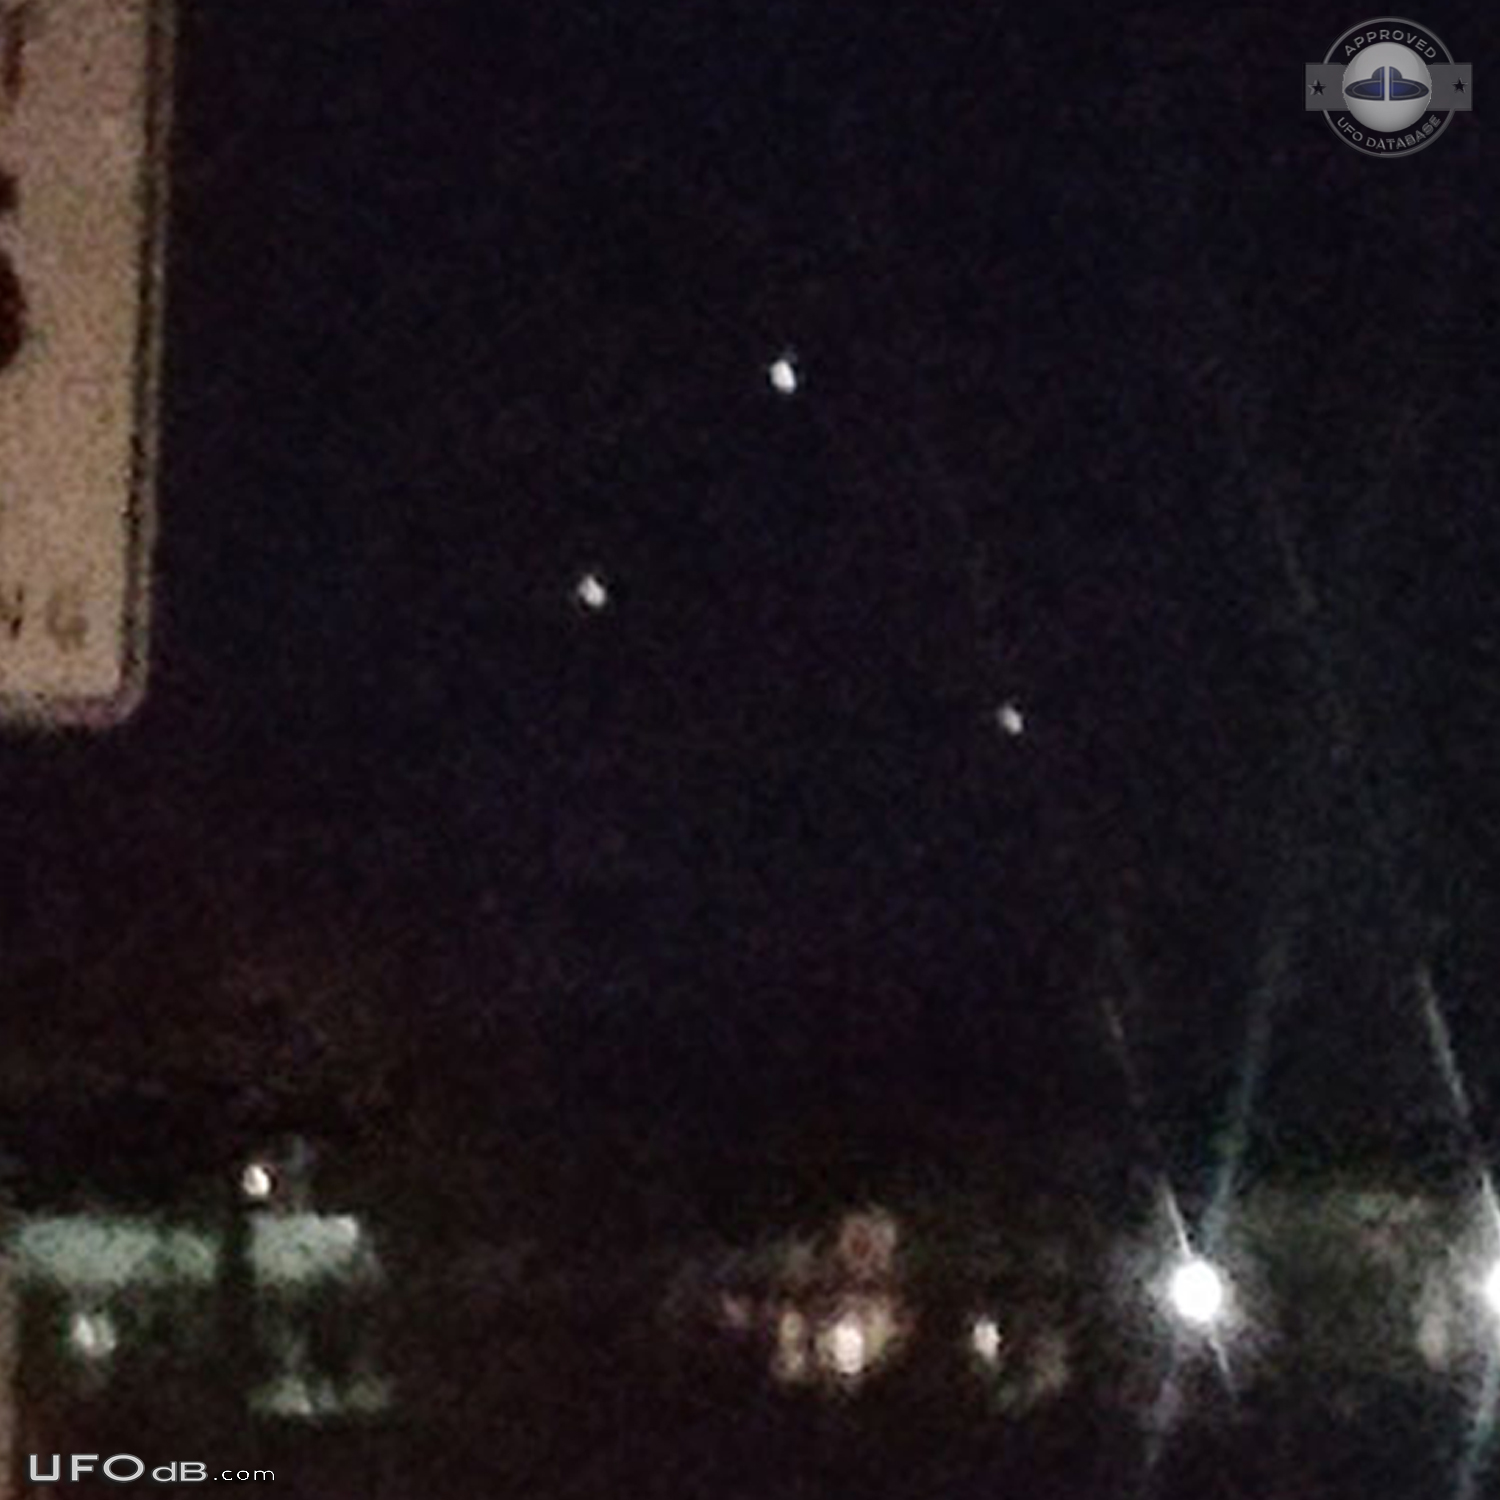 Me and coworker driving and saw the UFOs - Saint Cloud Florida USA 201 UFO Picture #780-4